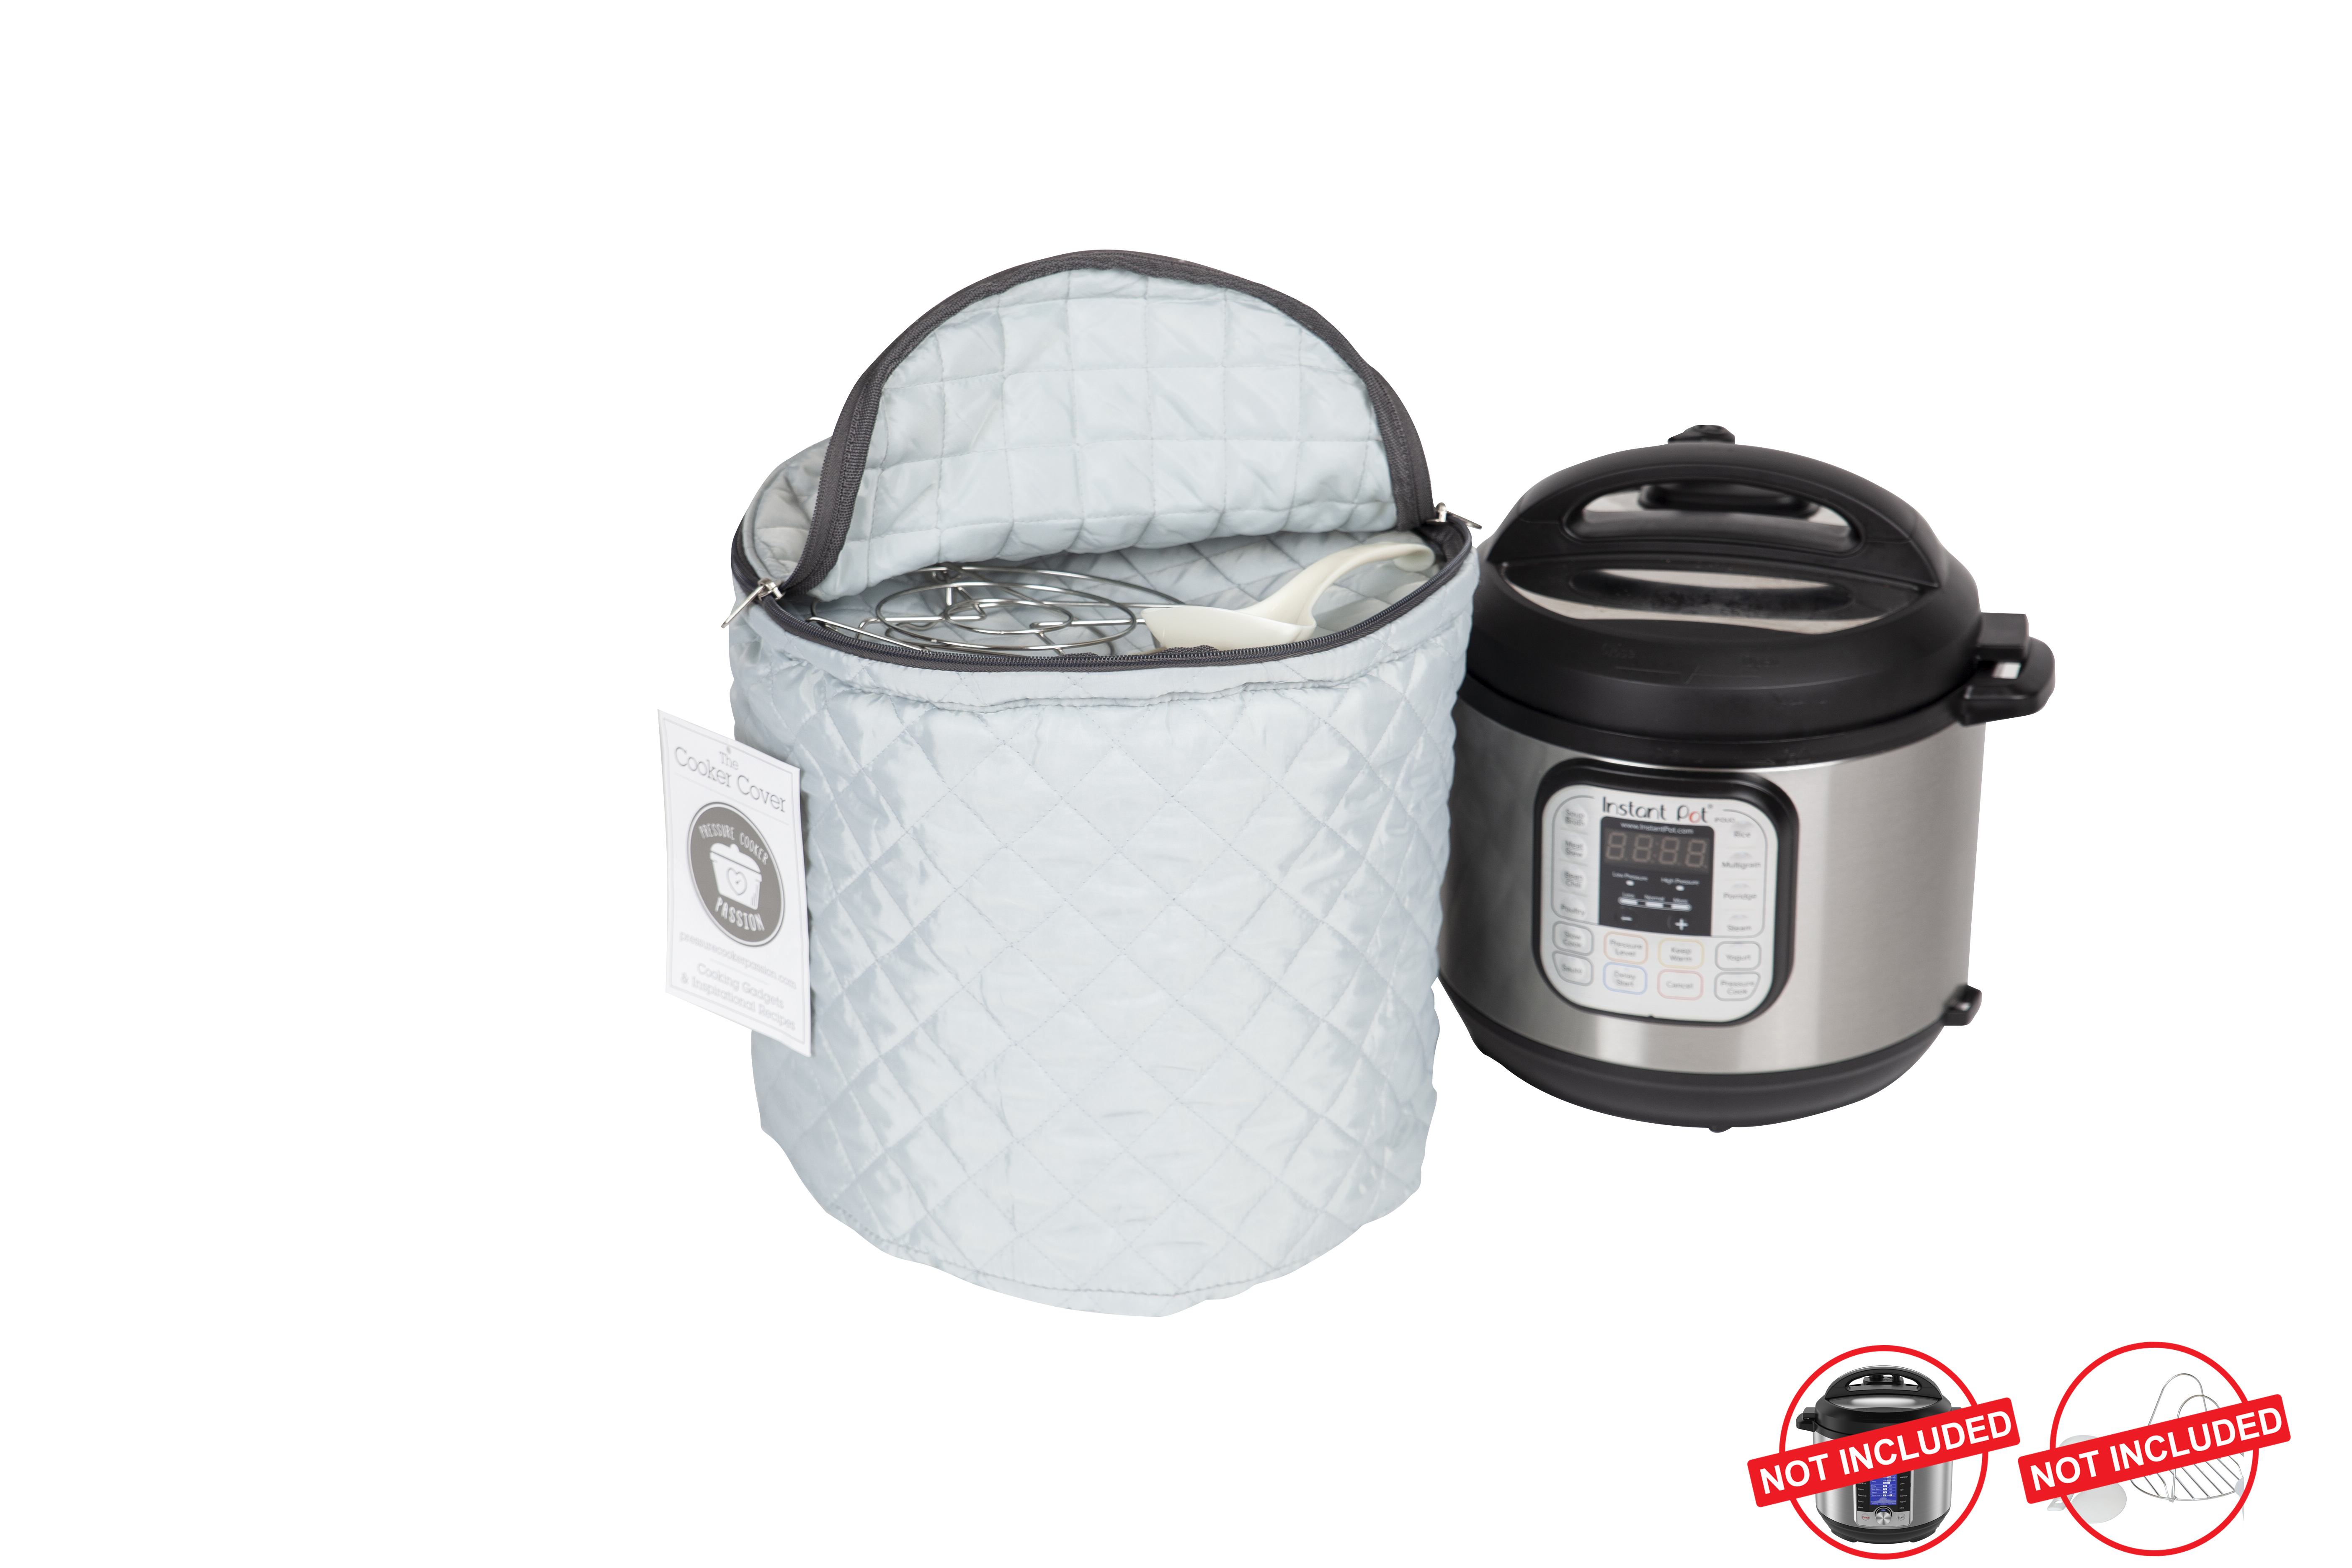 Pressure Cooker Dust Cover with Pocket Black These Cover Have Wipe Clean Liner for Easy Cleaning for Electric Pressure Cooker Air Fryer/Rice Cooker 